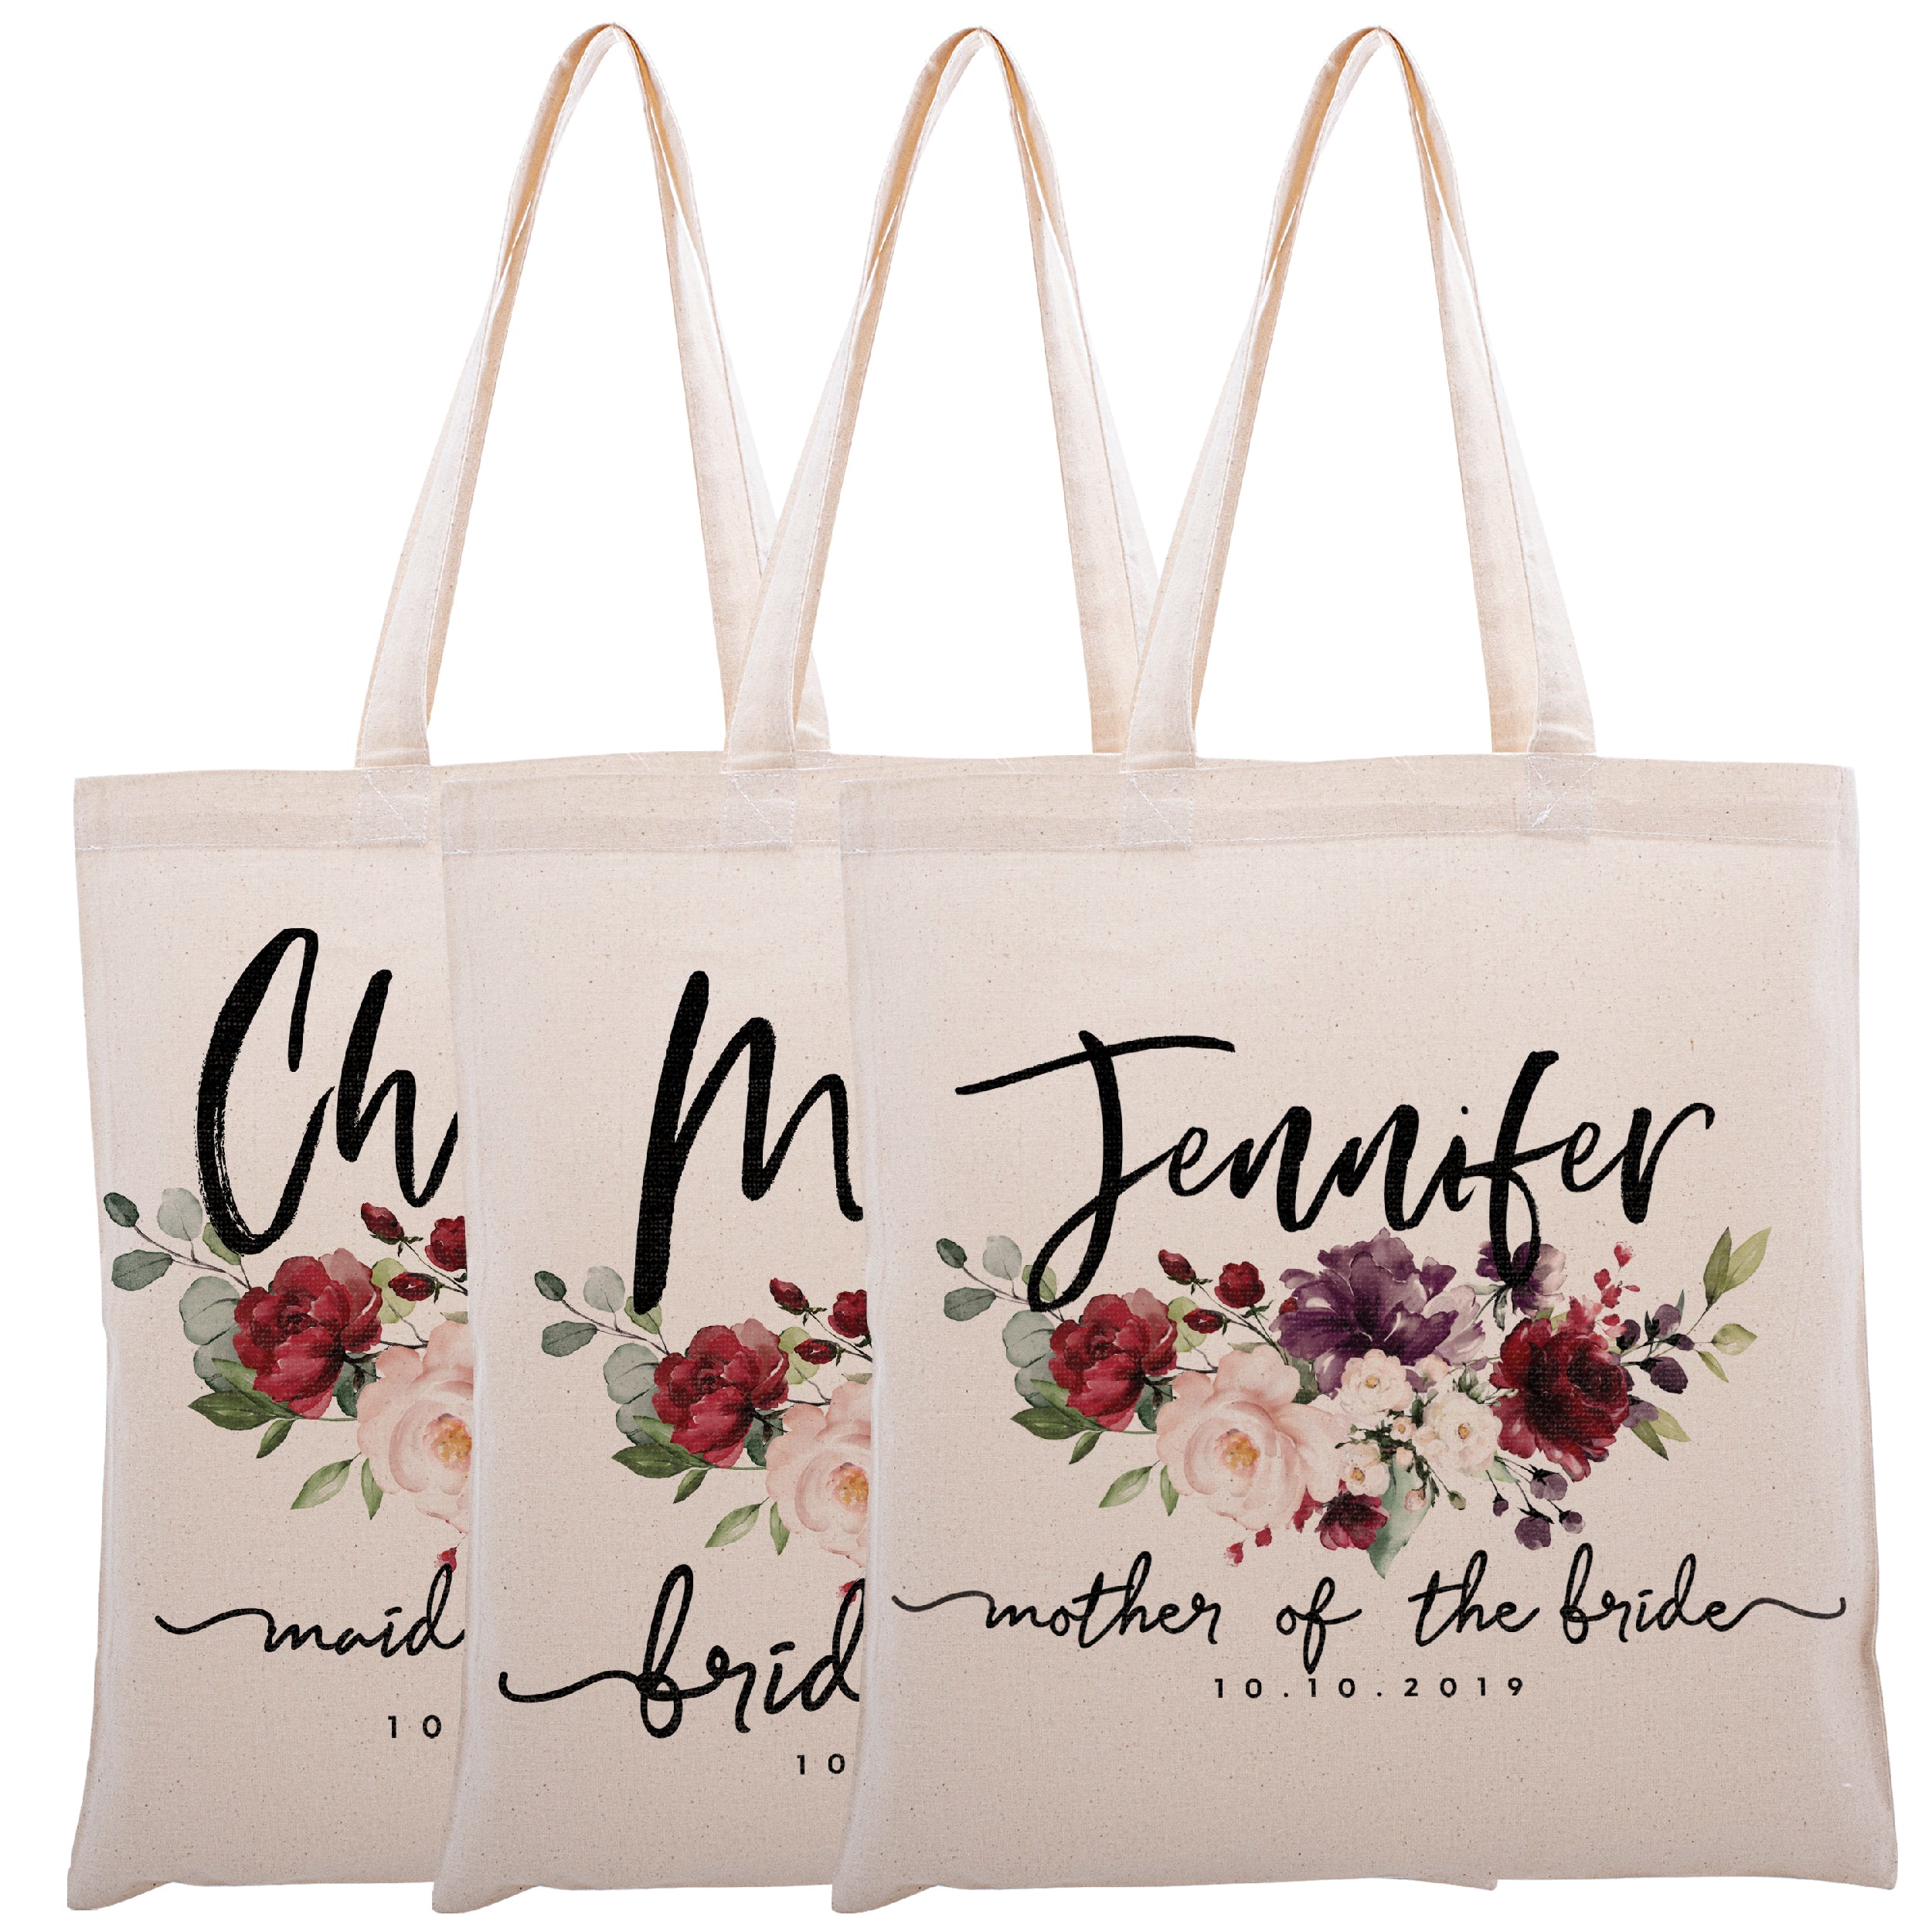  Set of 3 Personalized Initial Tote Bag for Bridesmaid